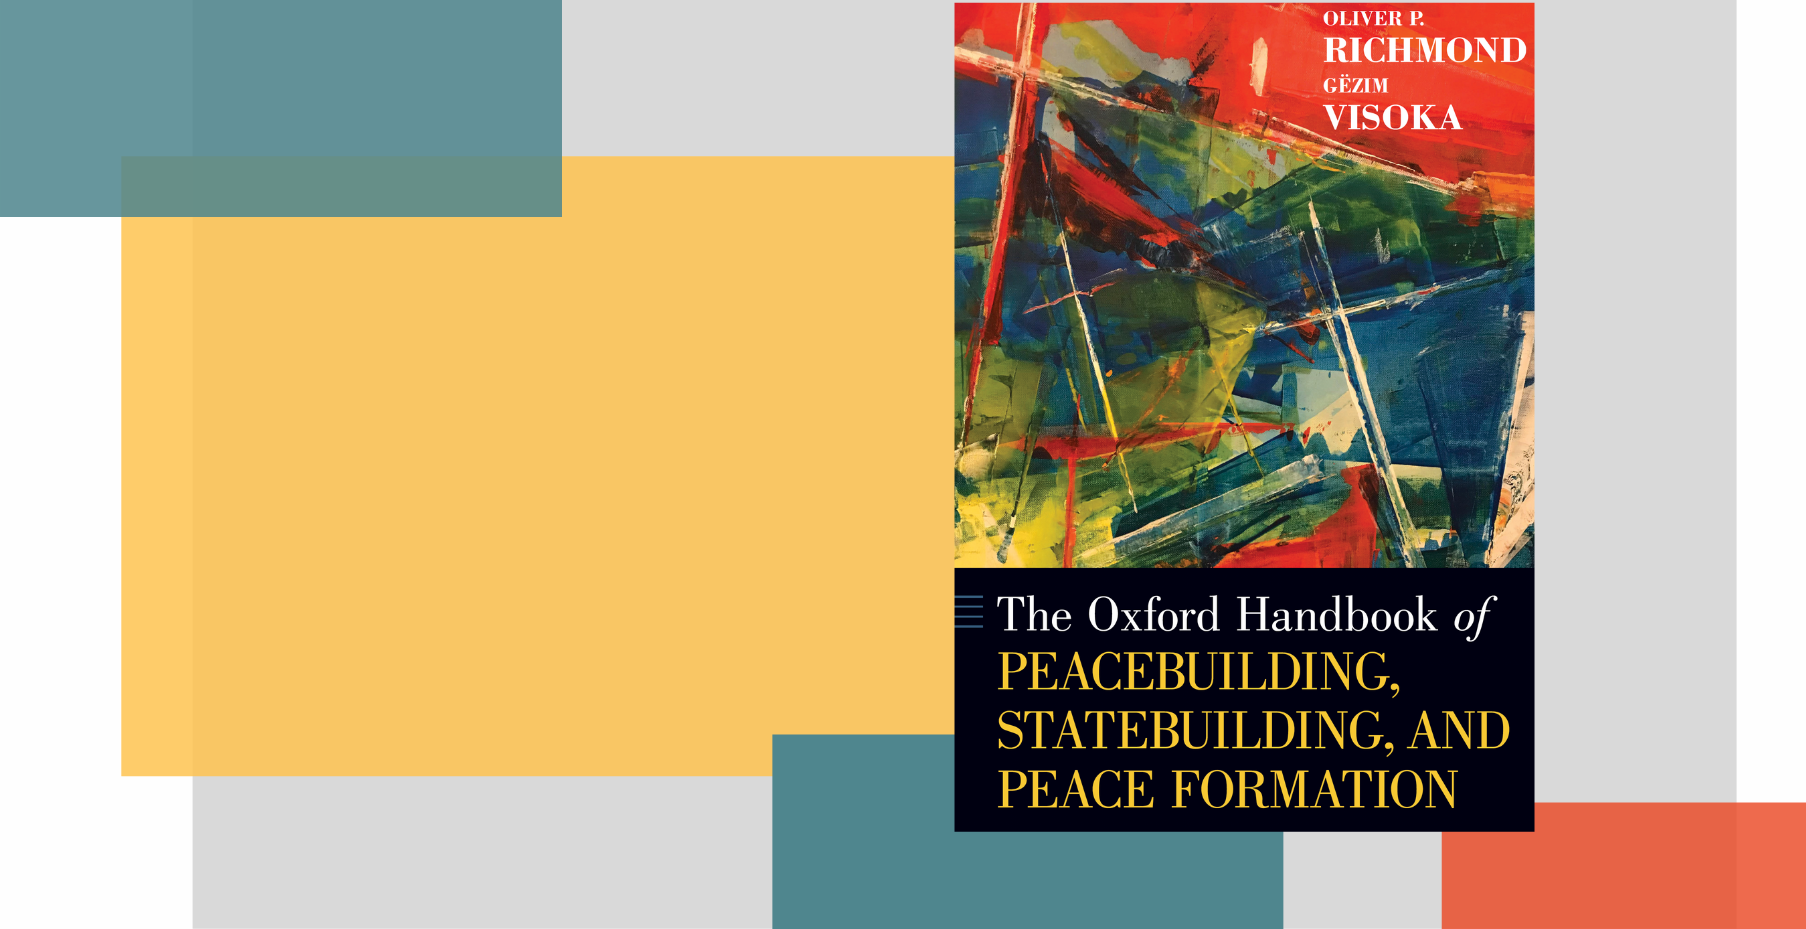 Oxford Handbook of Peacebuilding, Statebuilding and Peace Formation by Gezim Visoka and Oliver P. Richmond.